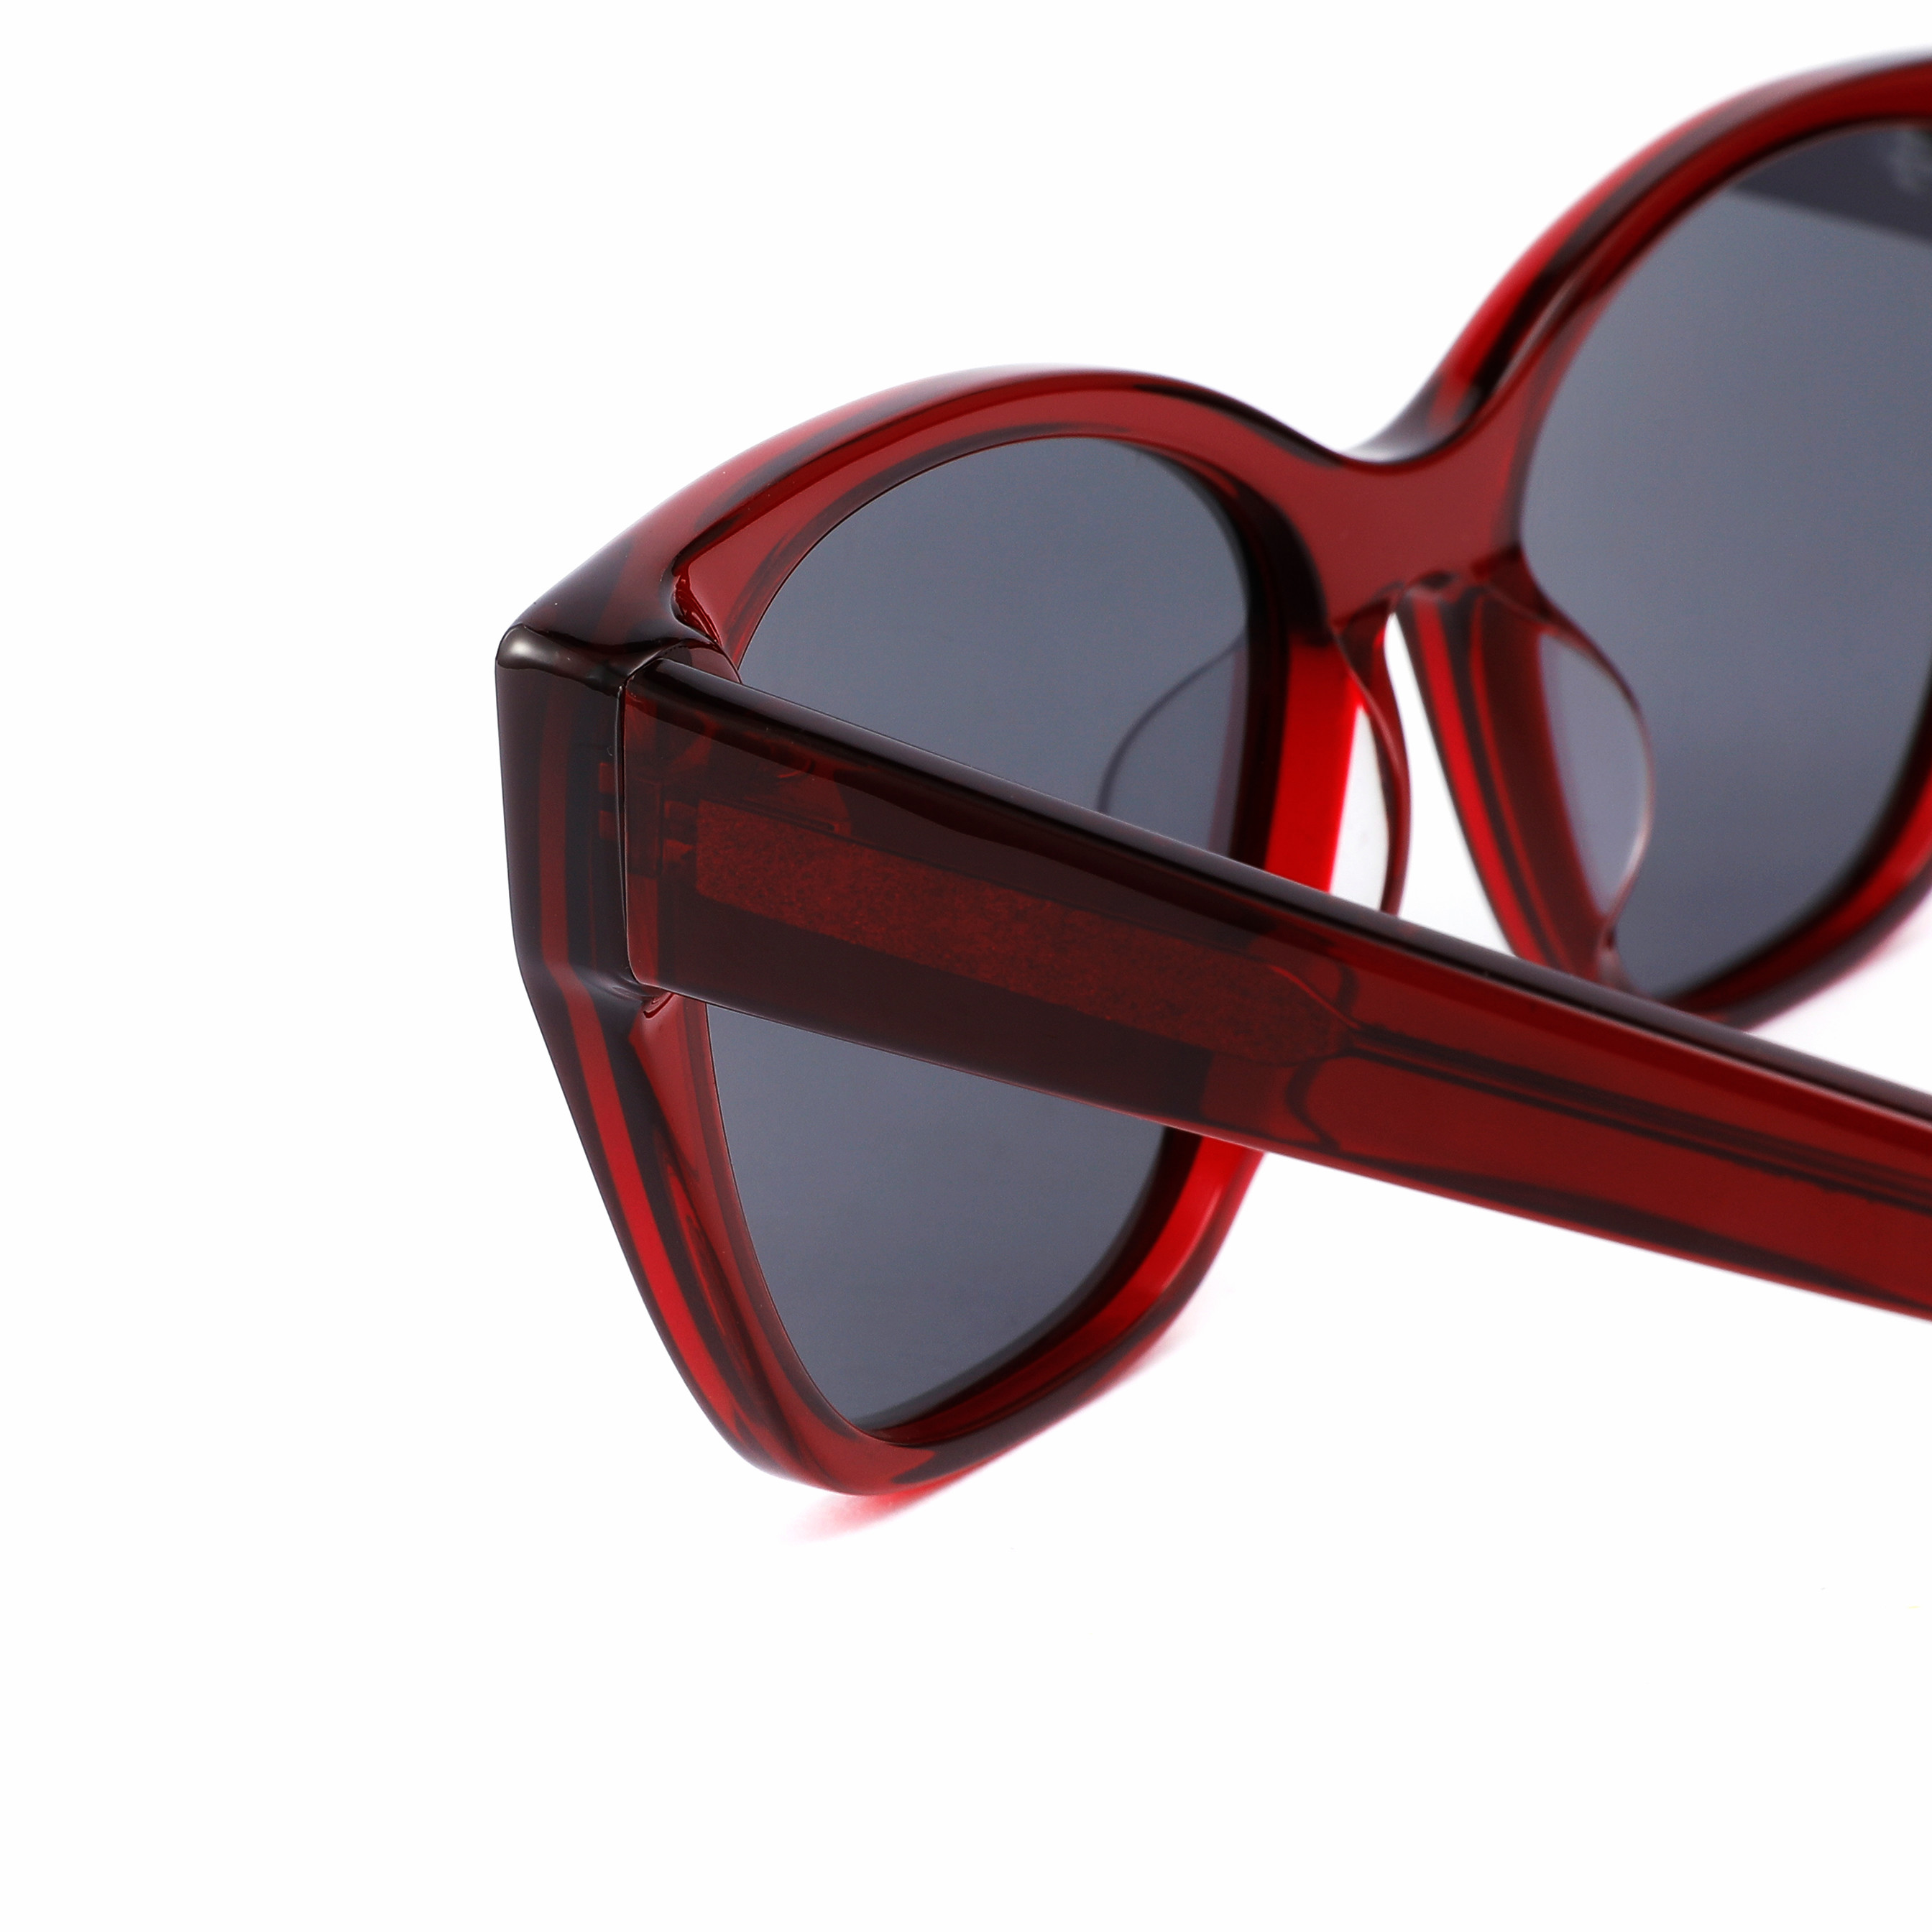  Red Color Transparent Cat Eye Acetate Frame Sunglasses For Women Uv400 Protection Manufactures